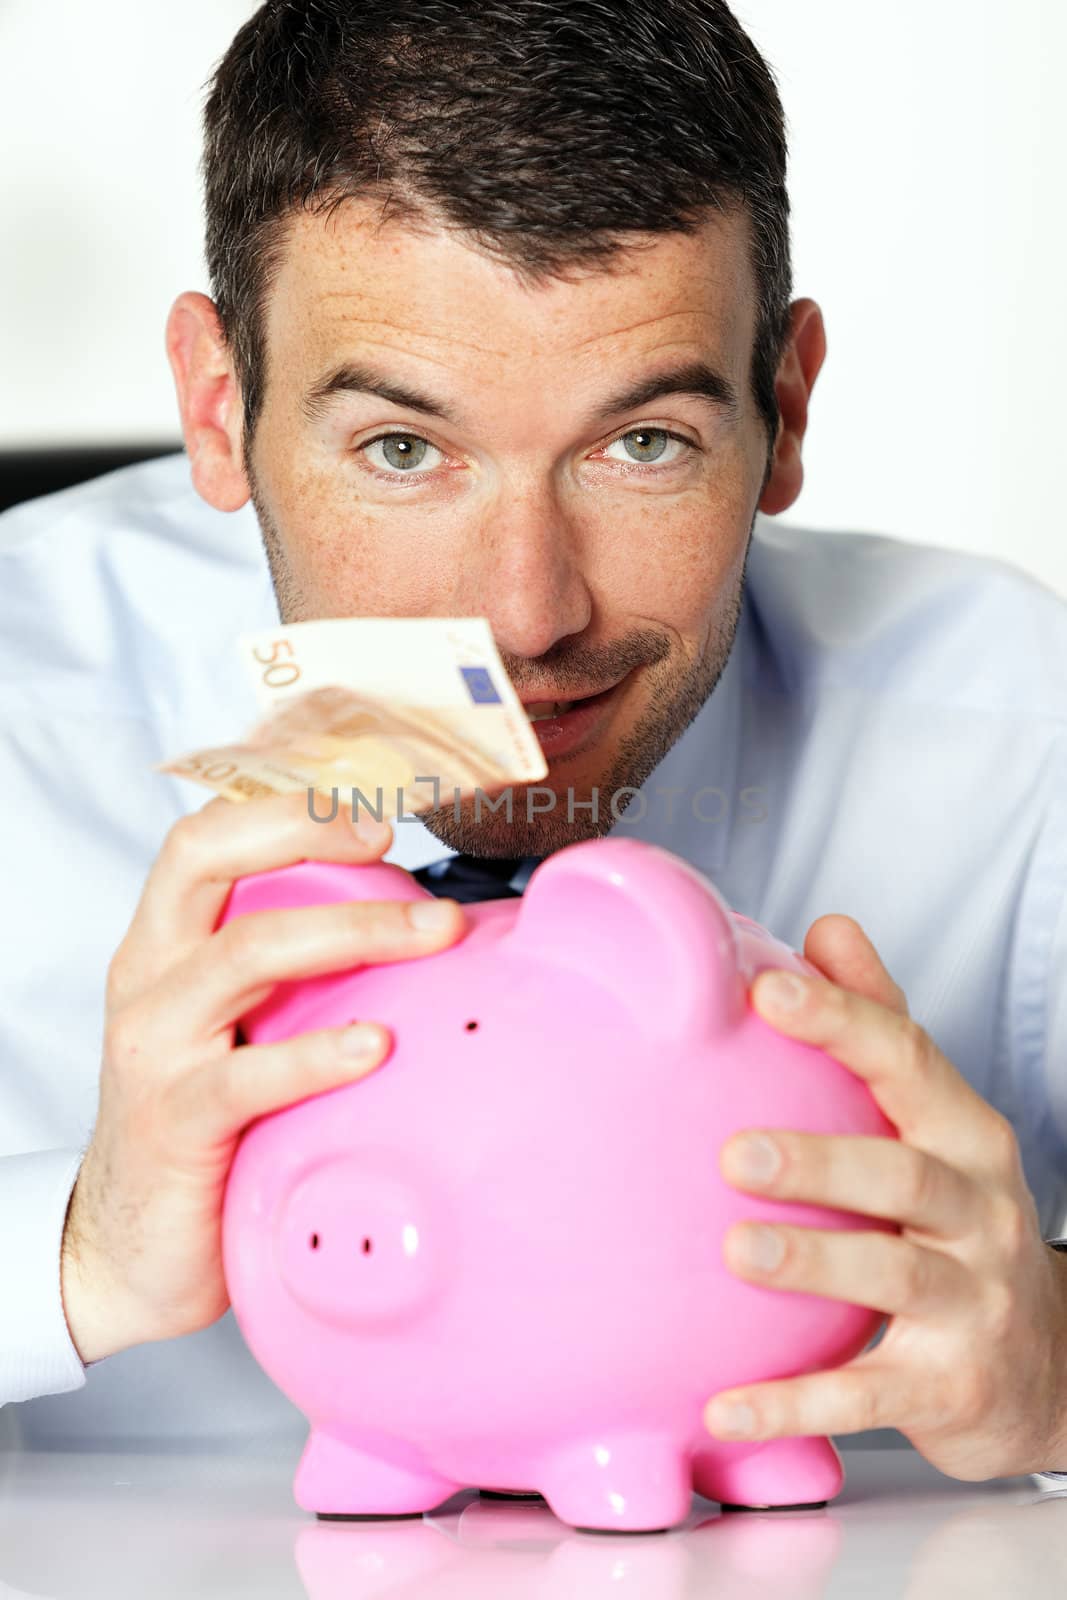 man with pink piggy bank and fifty euro banknote